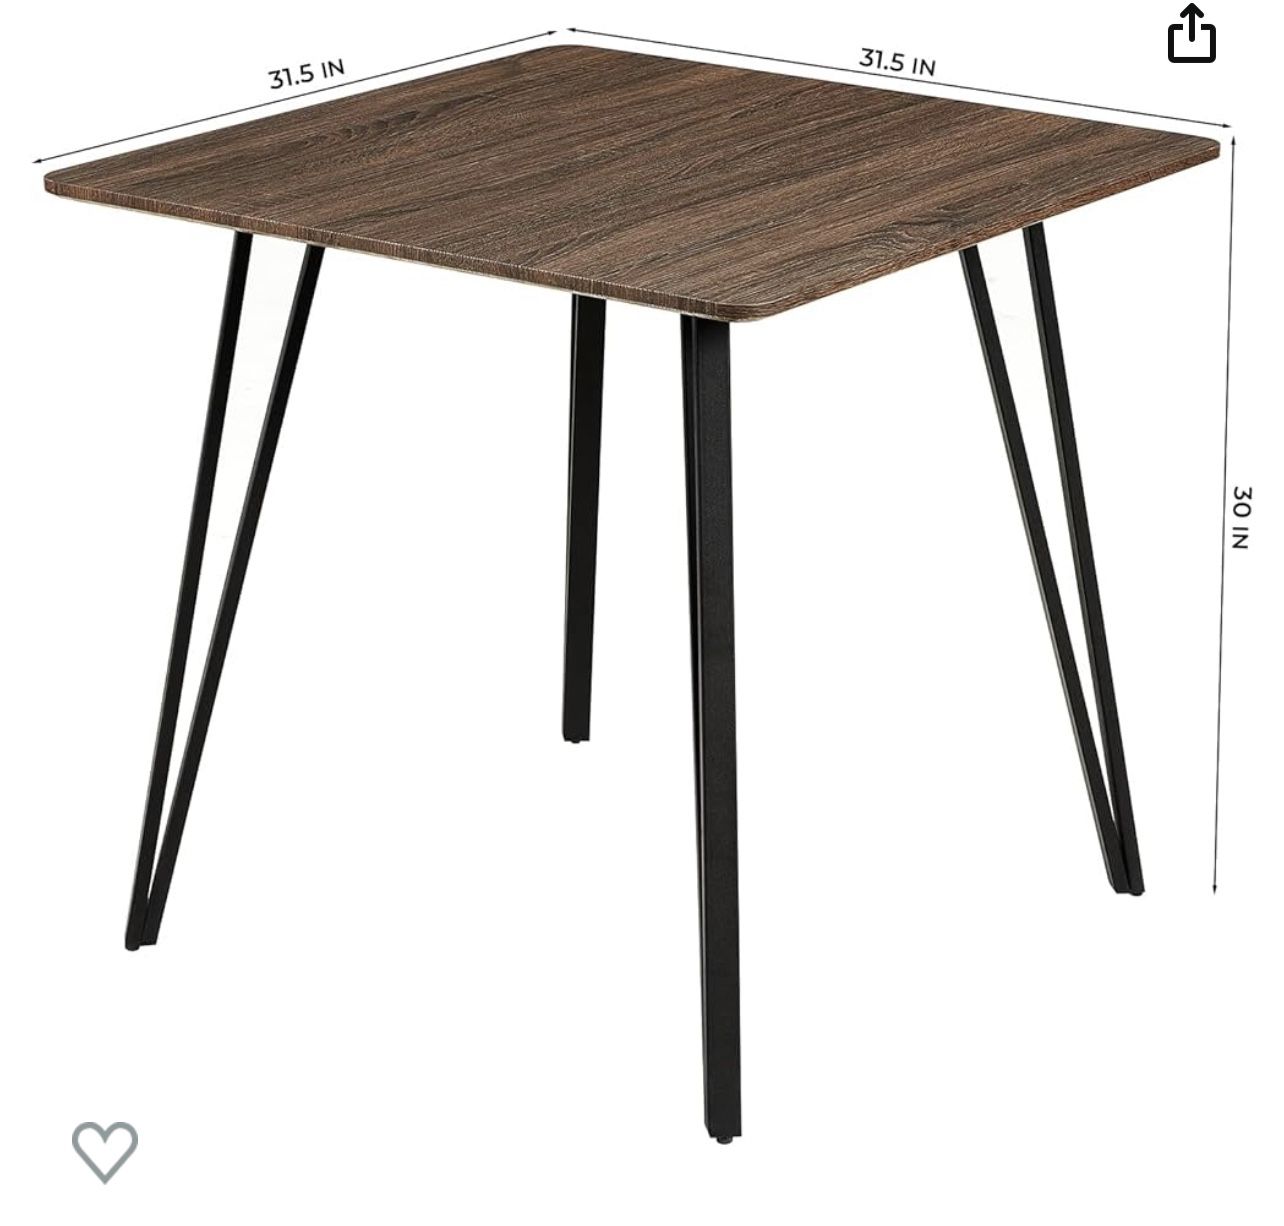 GreenForest 31.5’’ Dining Table Small Square Kitchen Room Table Modern Industrial Wooden Leisure Coffee Table with Solid Metal Legs for Living Room Co